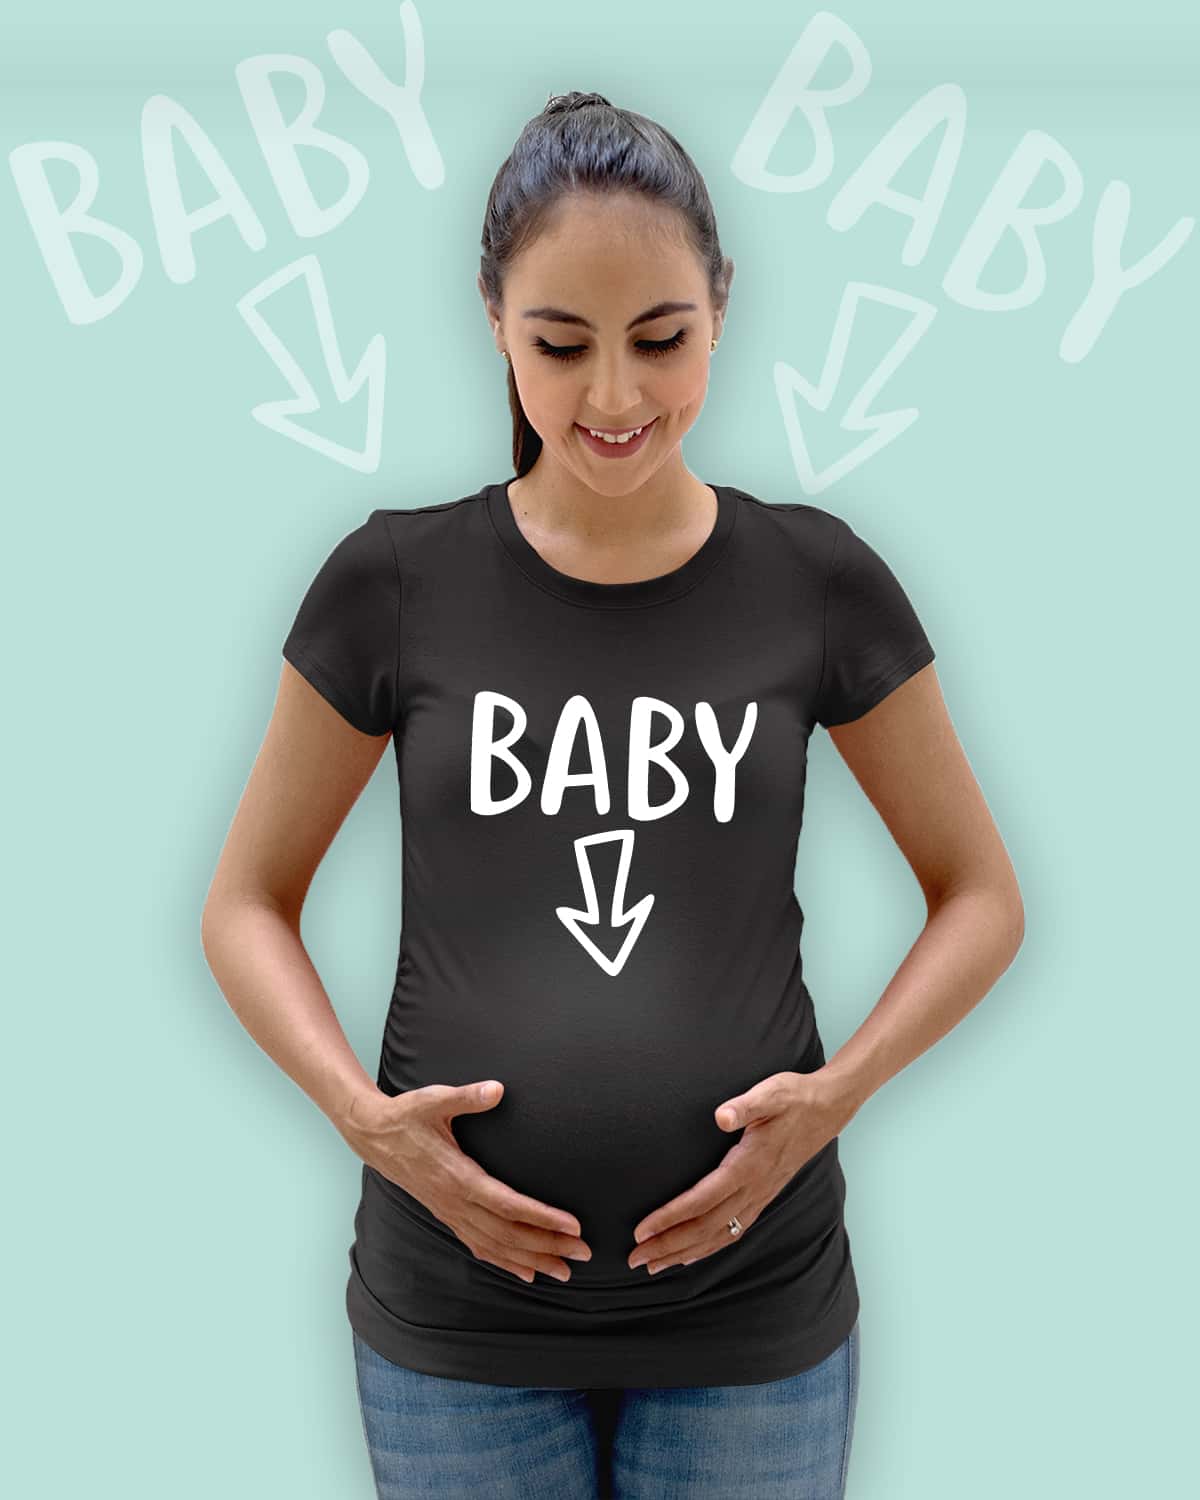 jopo maternity photoshoot ideas poses props indian pregnancy announcement quotes Baby Black